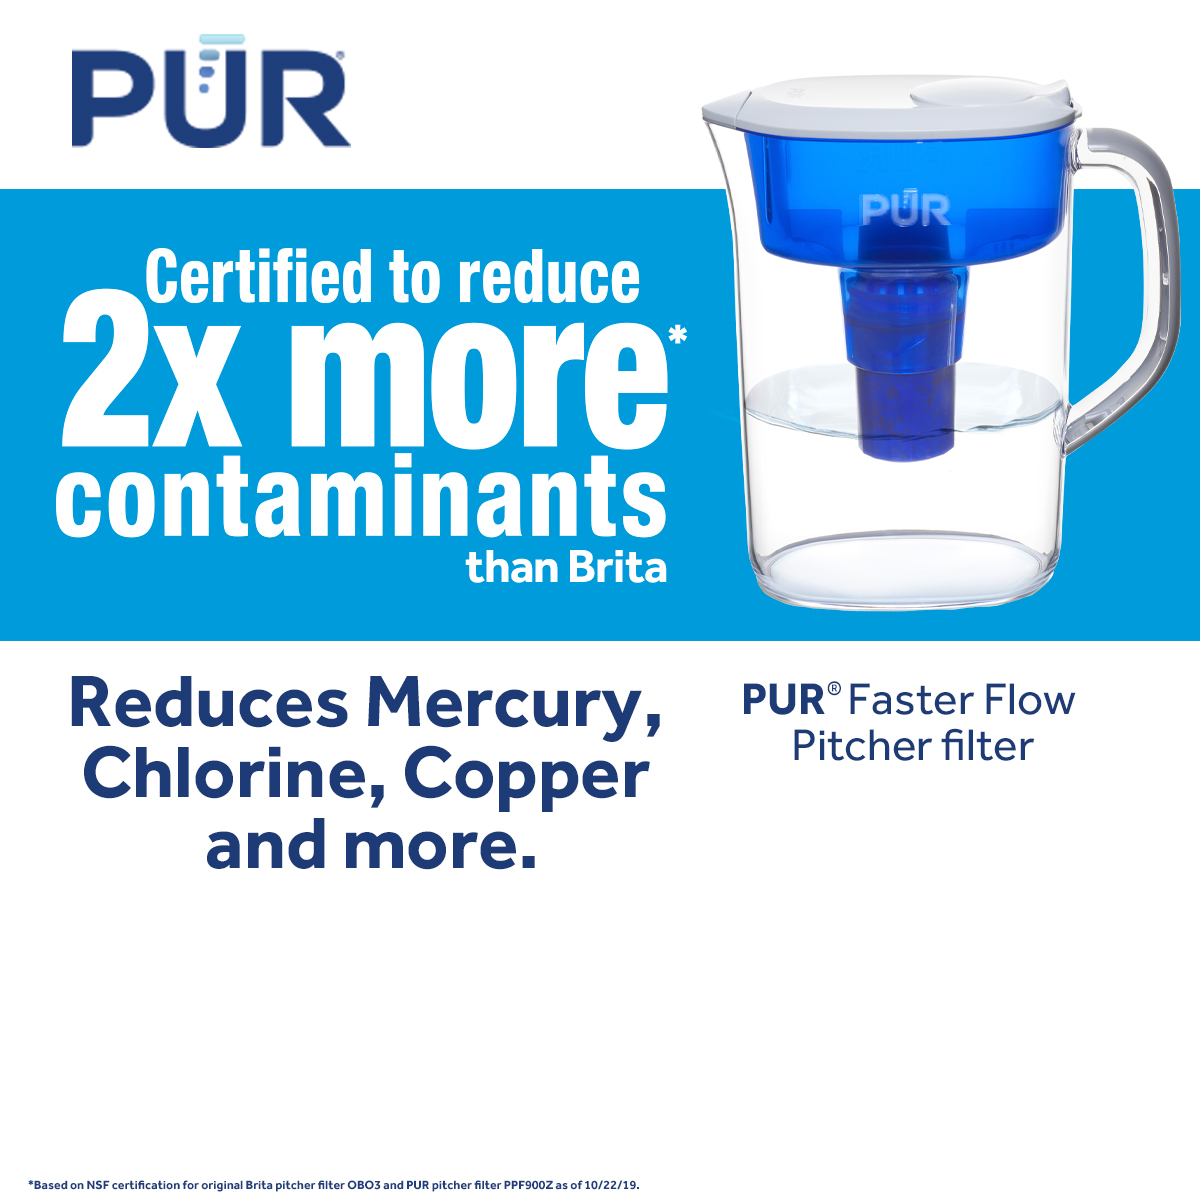 PUR 7 Cup Pitcher Filtration System, PPT700W, Blue/White - image 2 of 13